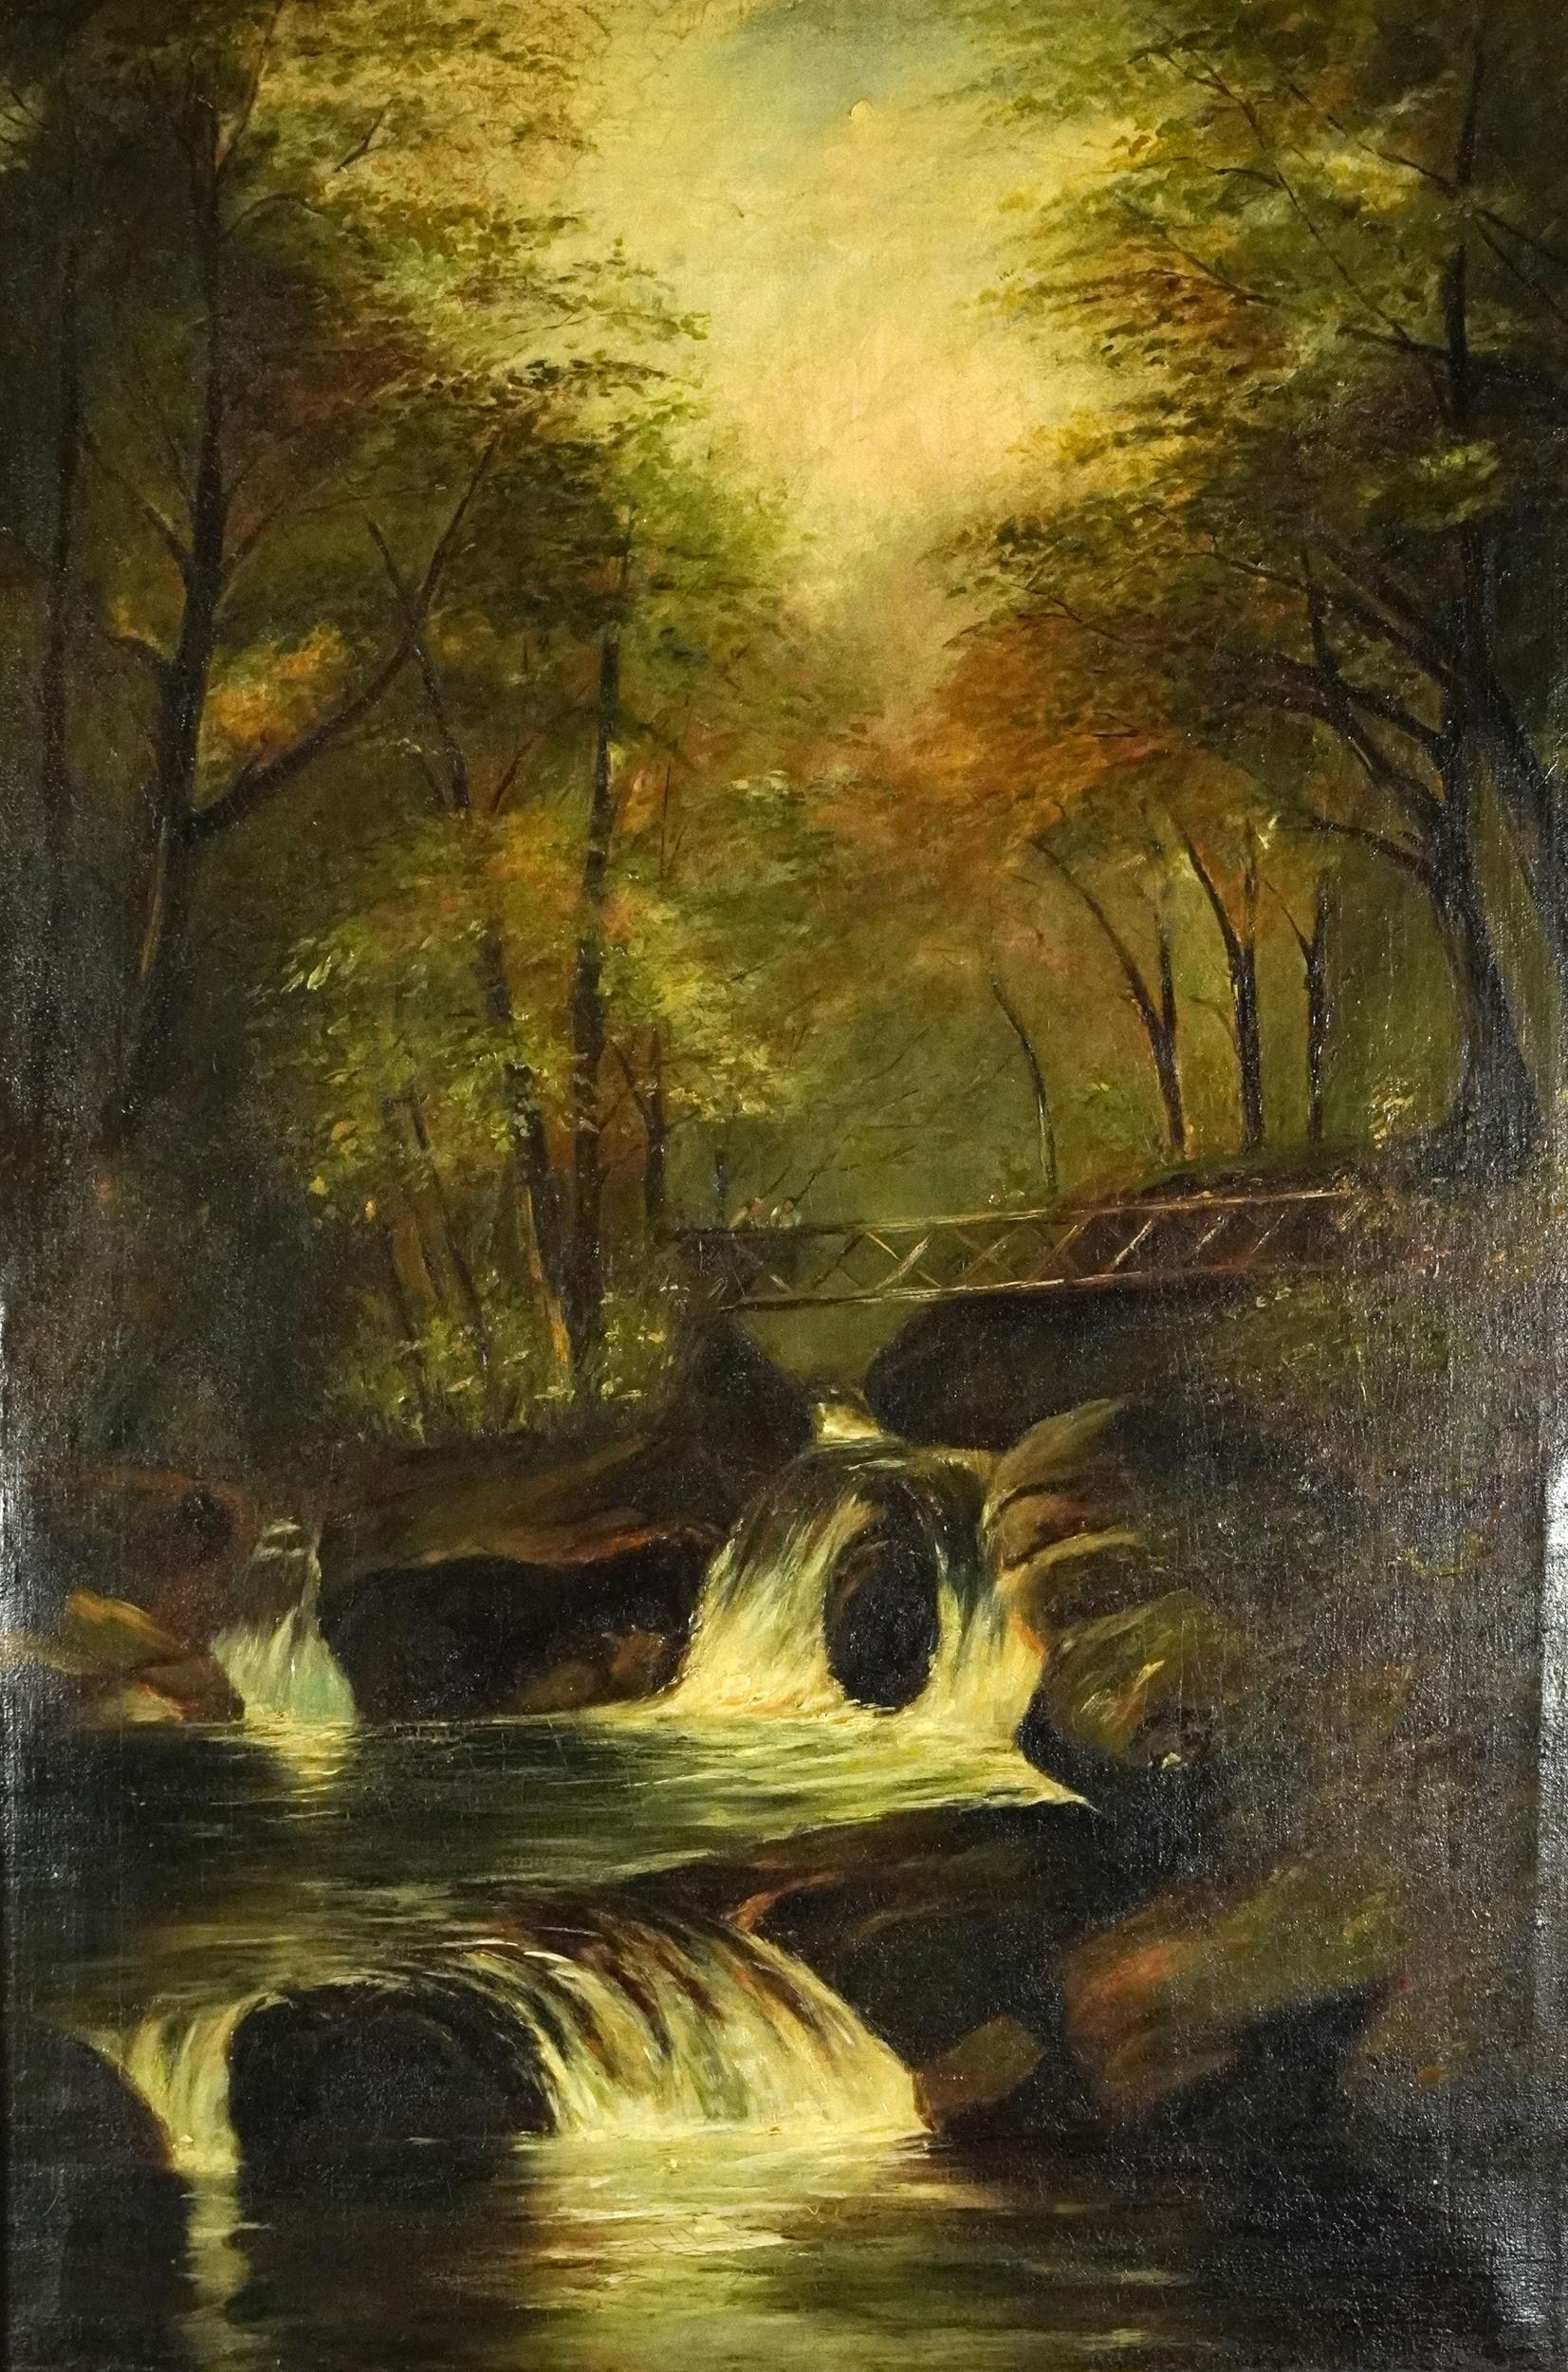 Betws-Y-Coed, figures on a bridge over waterfall, 19th century English school oil on canvas, mounted